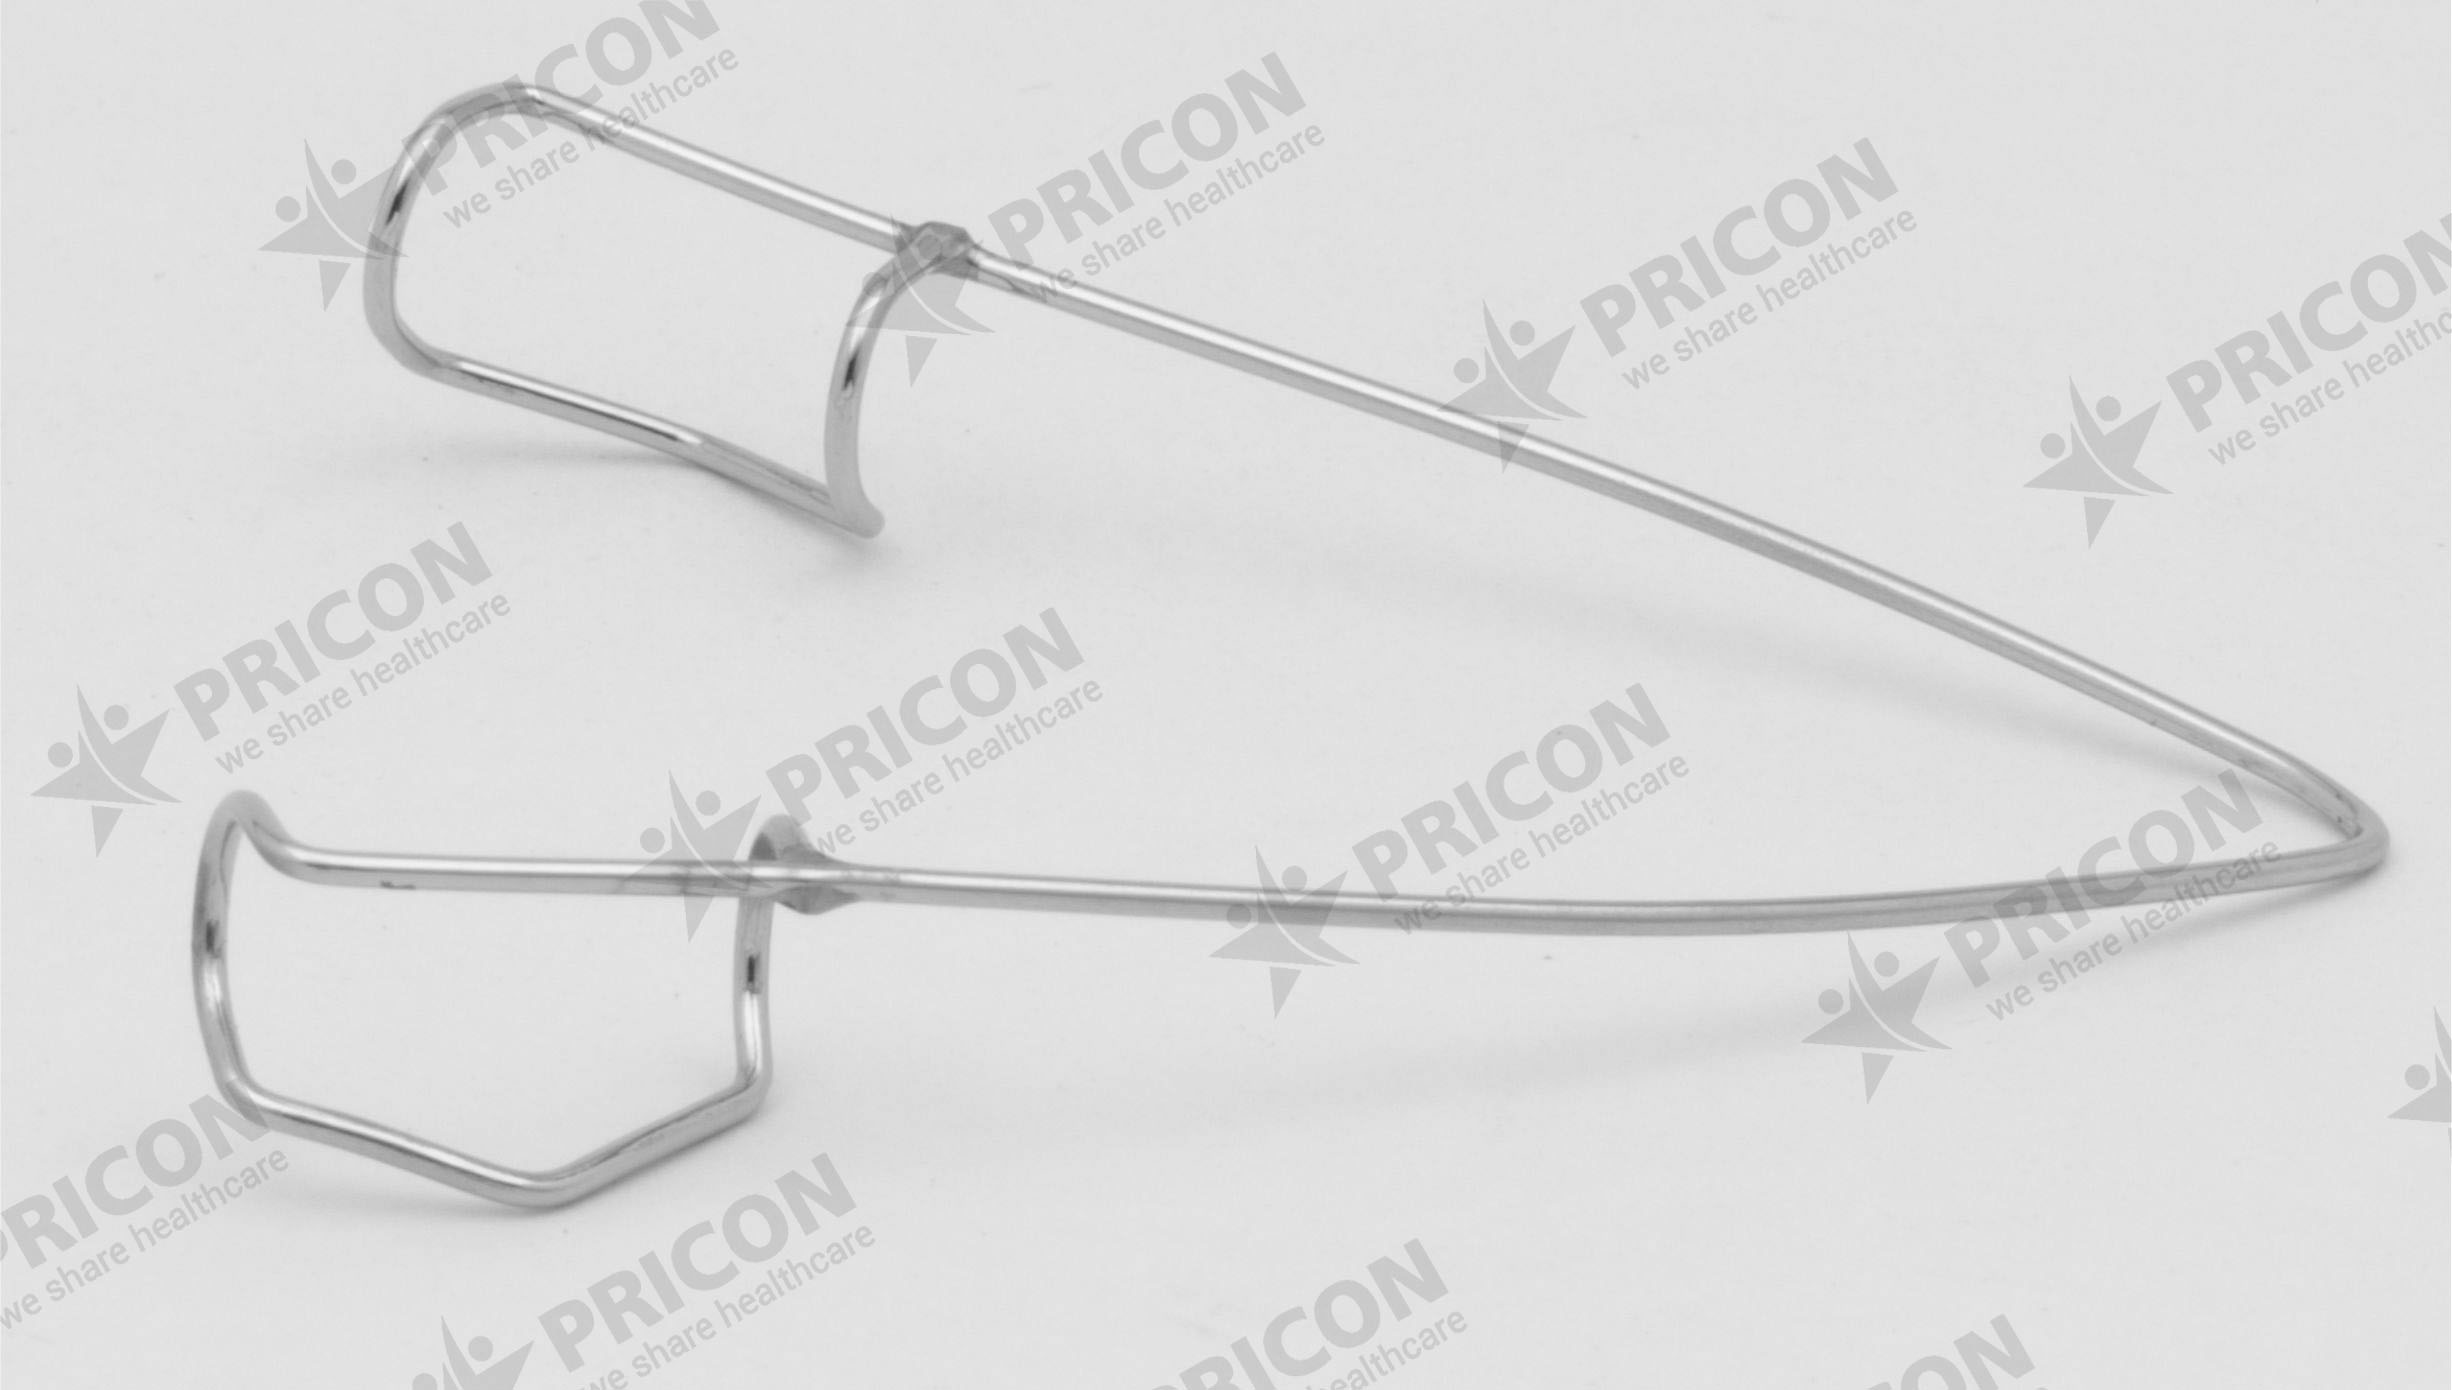 SPECULUM-McINTYRE-WIRE-V-SHAPED-BLADES